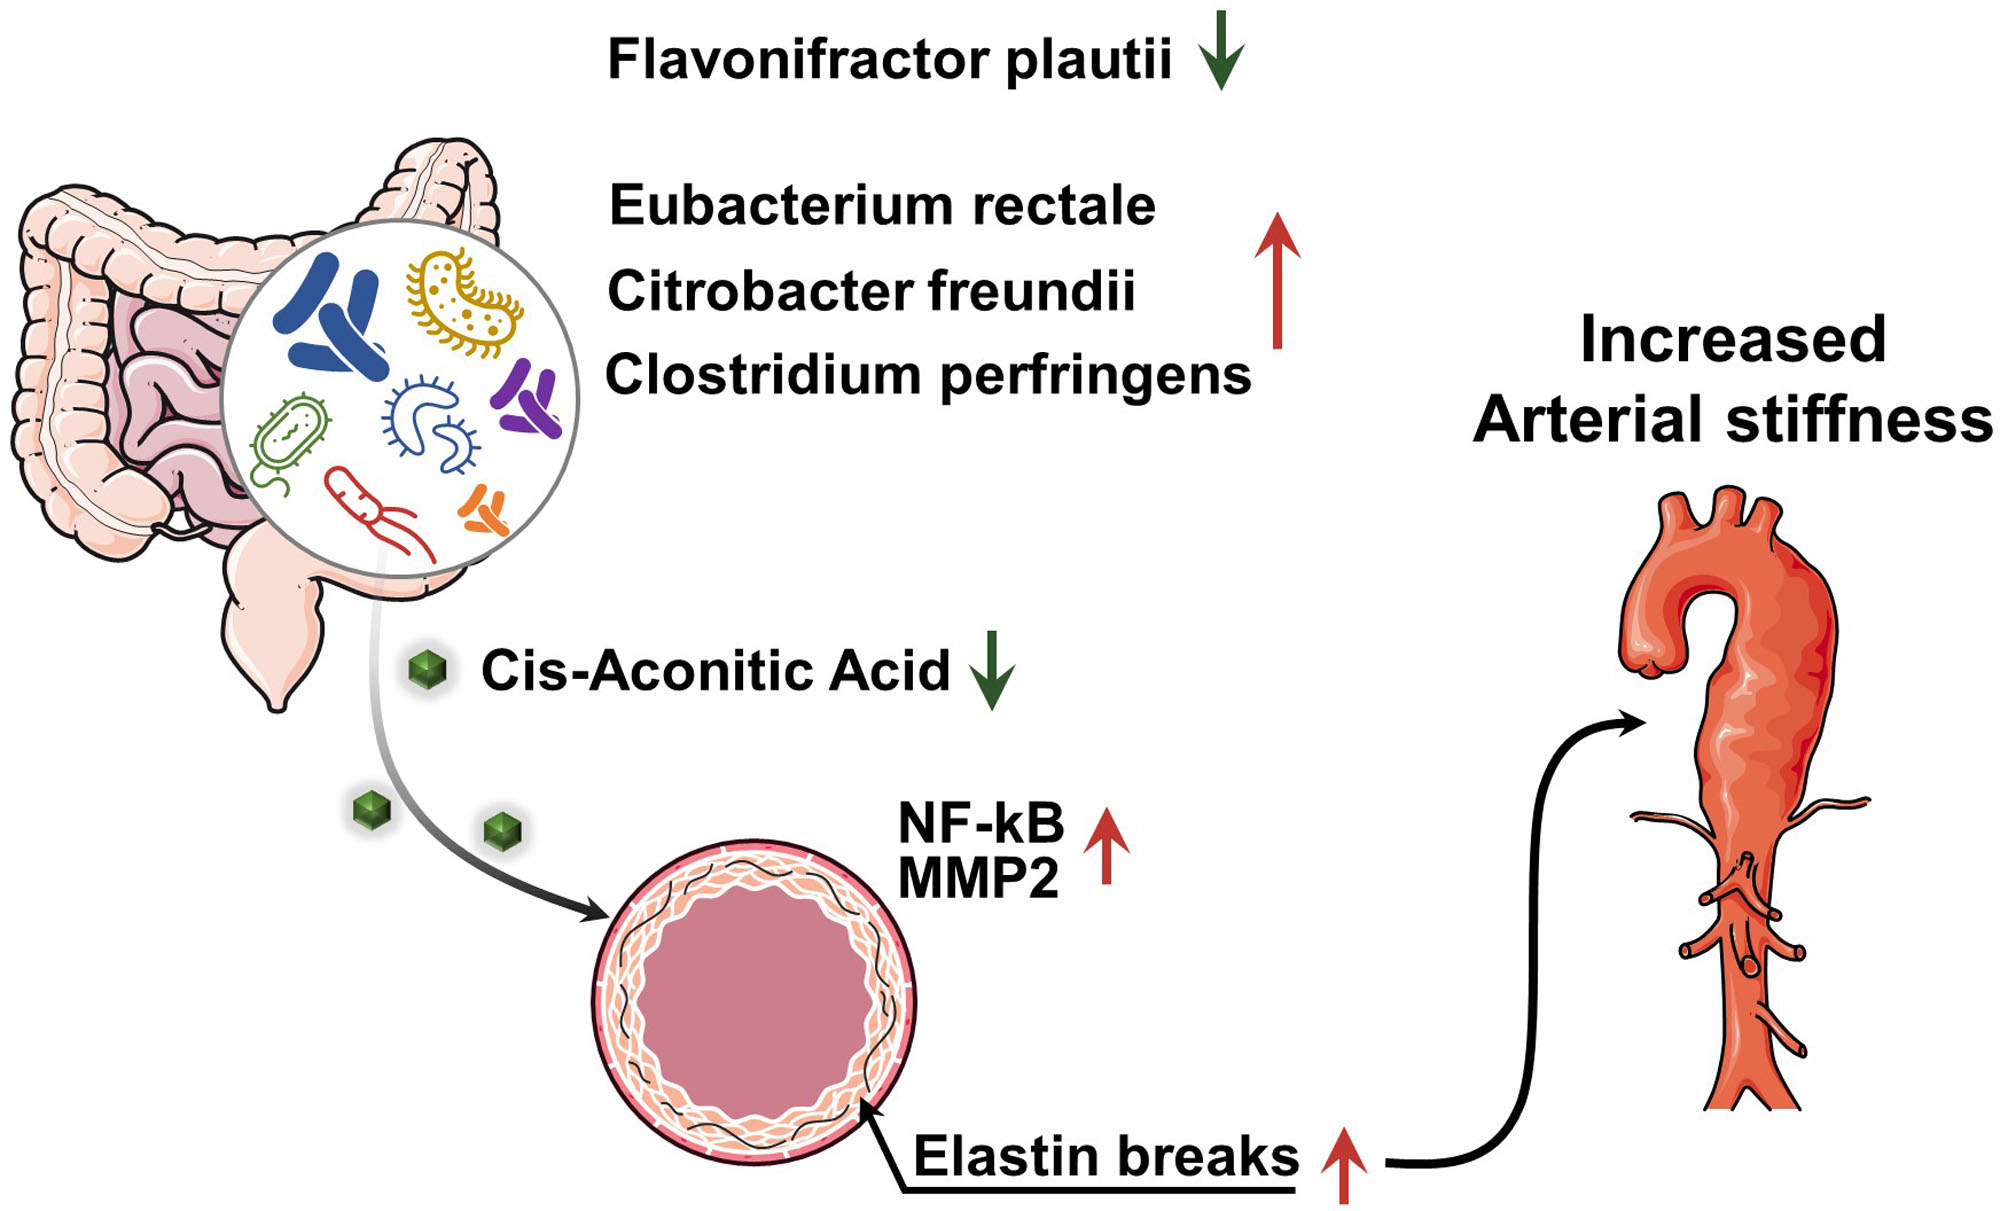 Flavonifractor plautii Protects Against Elevated Arterial Stiffness